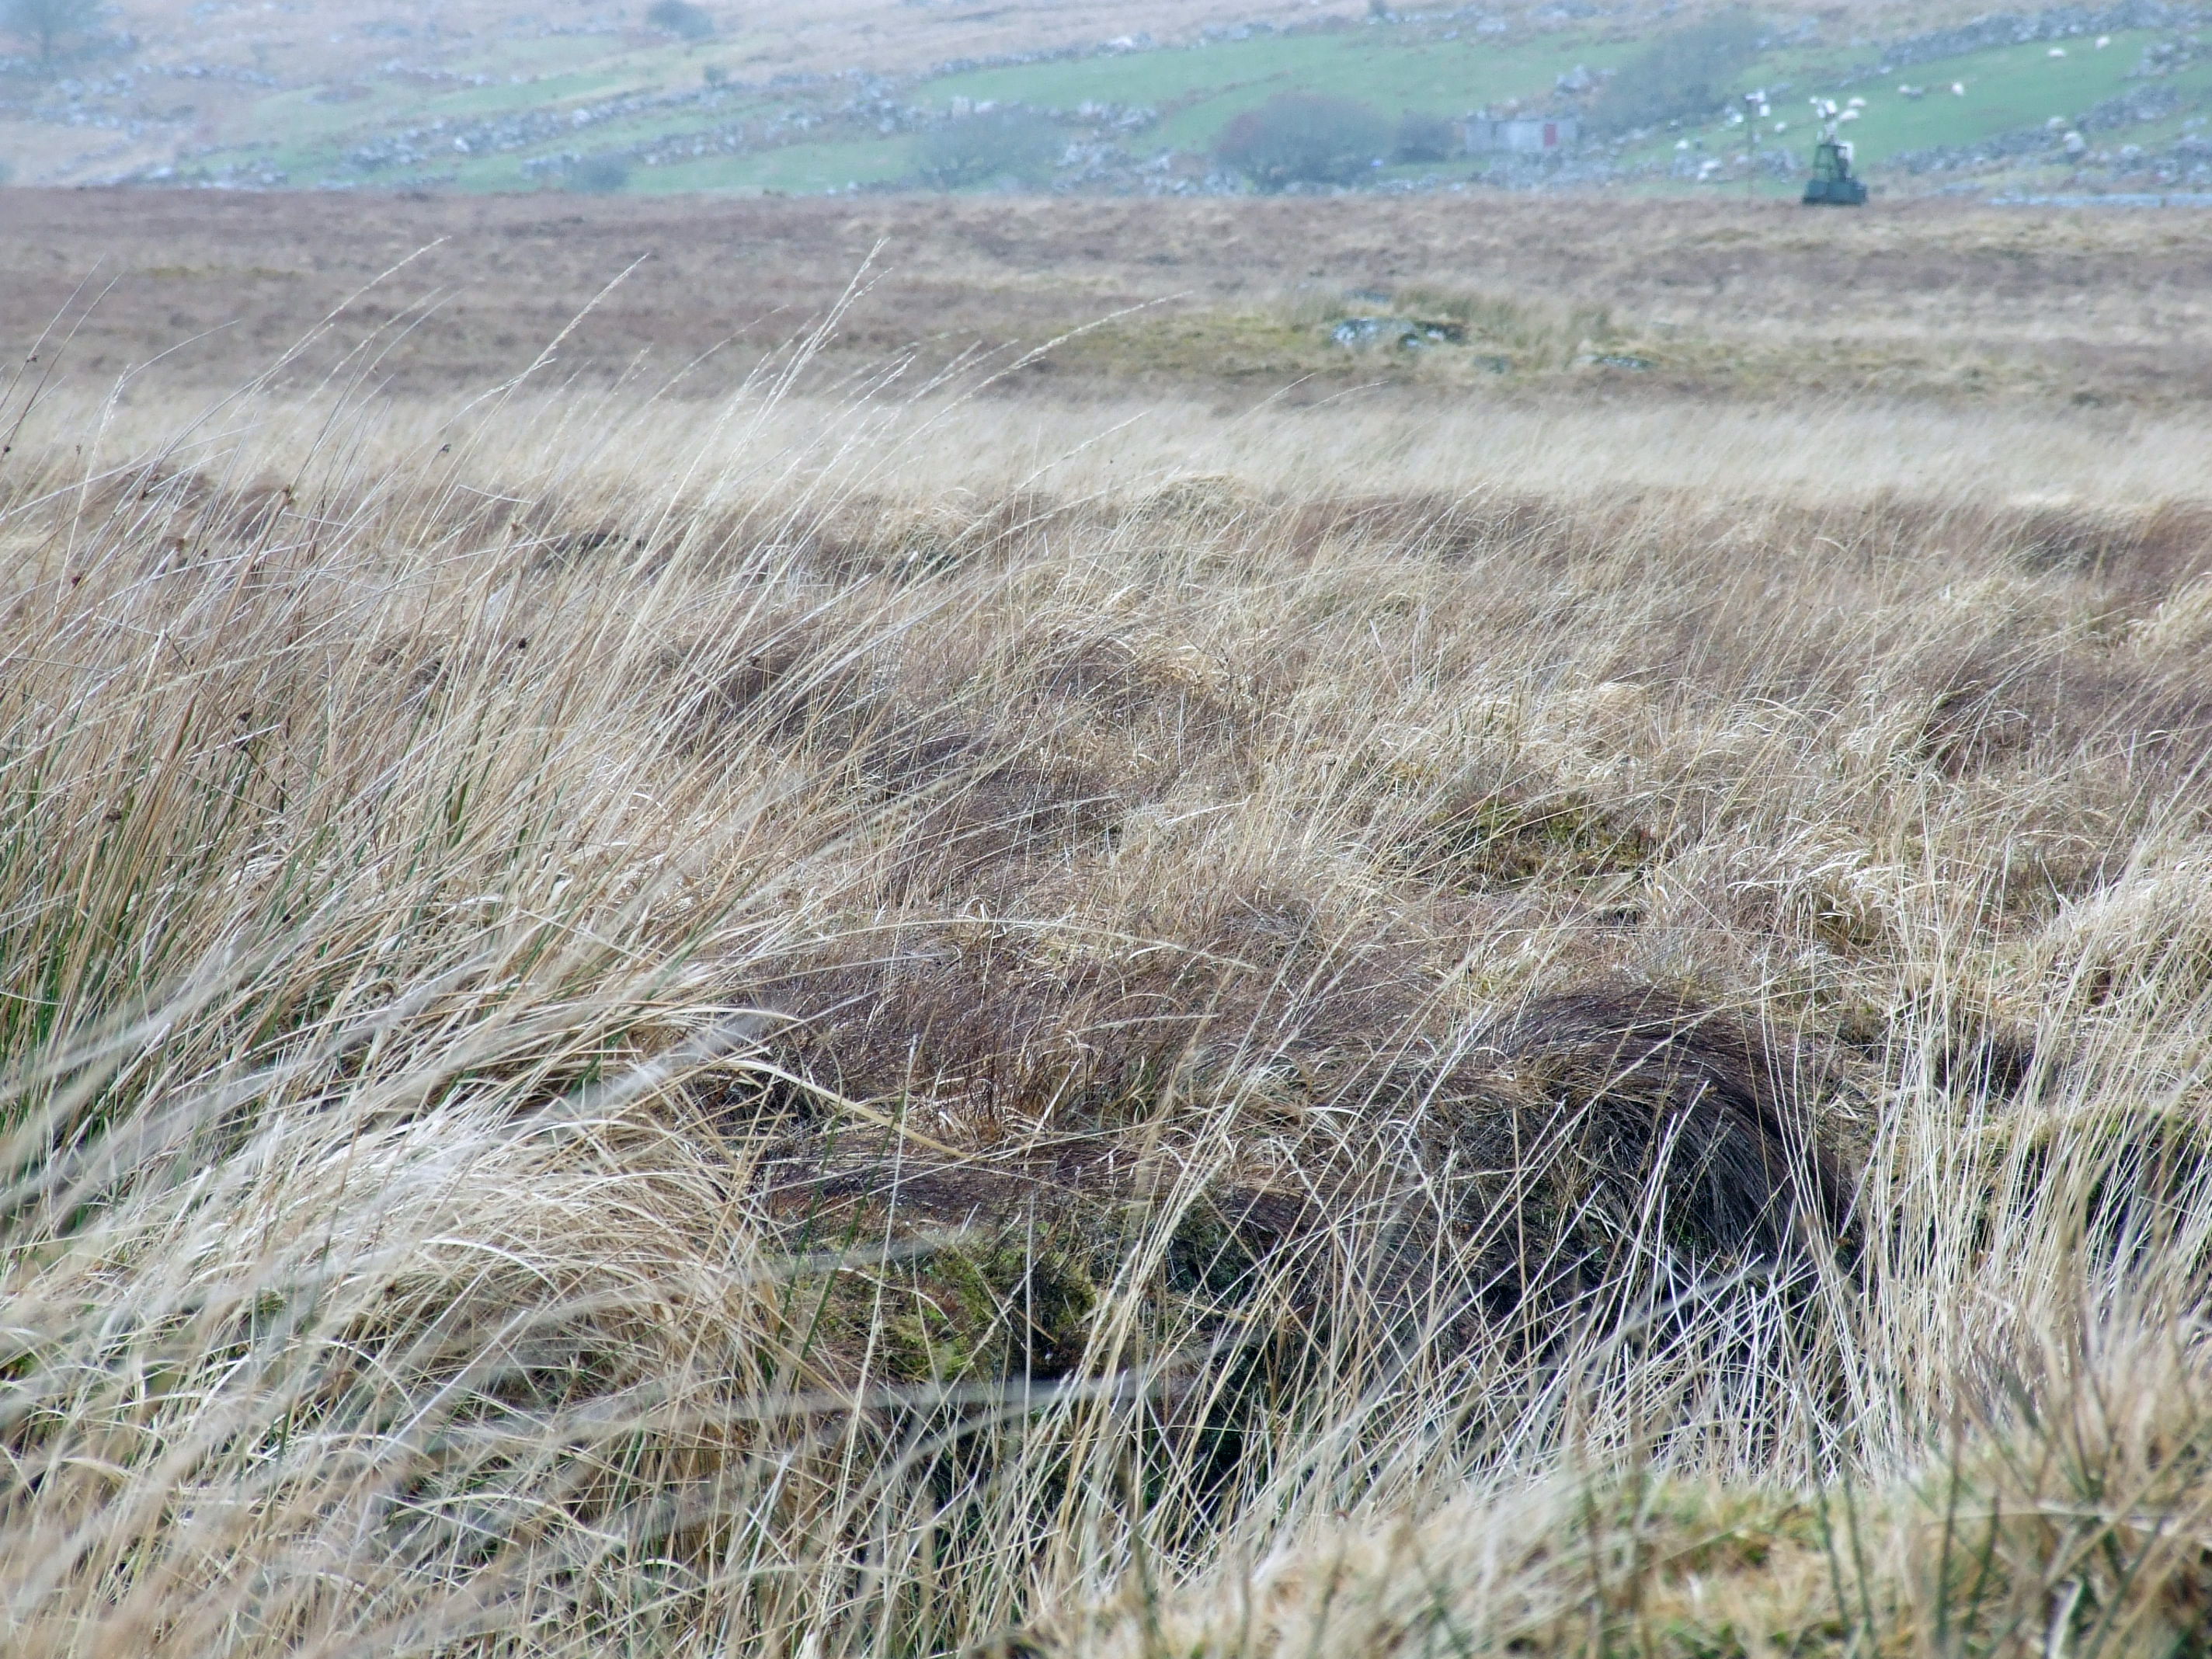 The heathland is currently used as grazing for sheep.